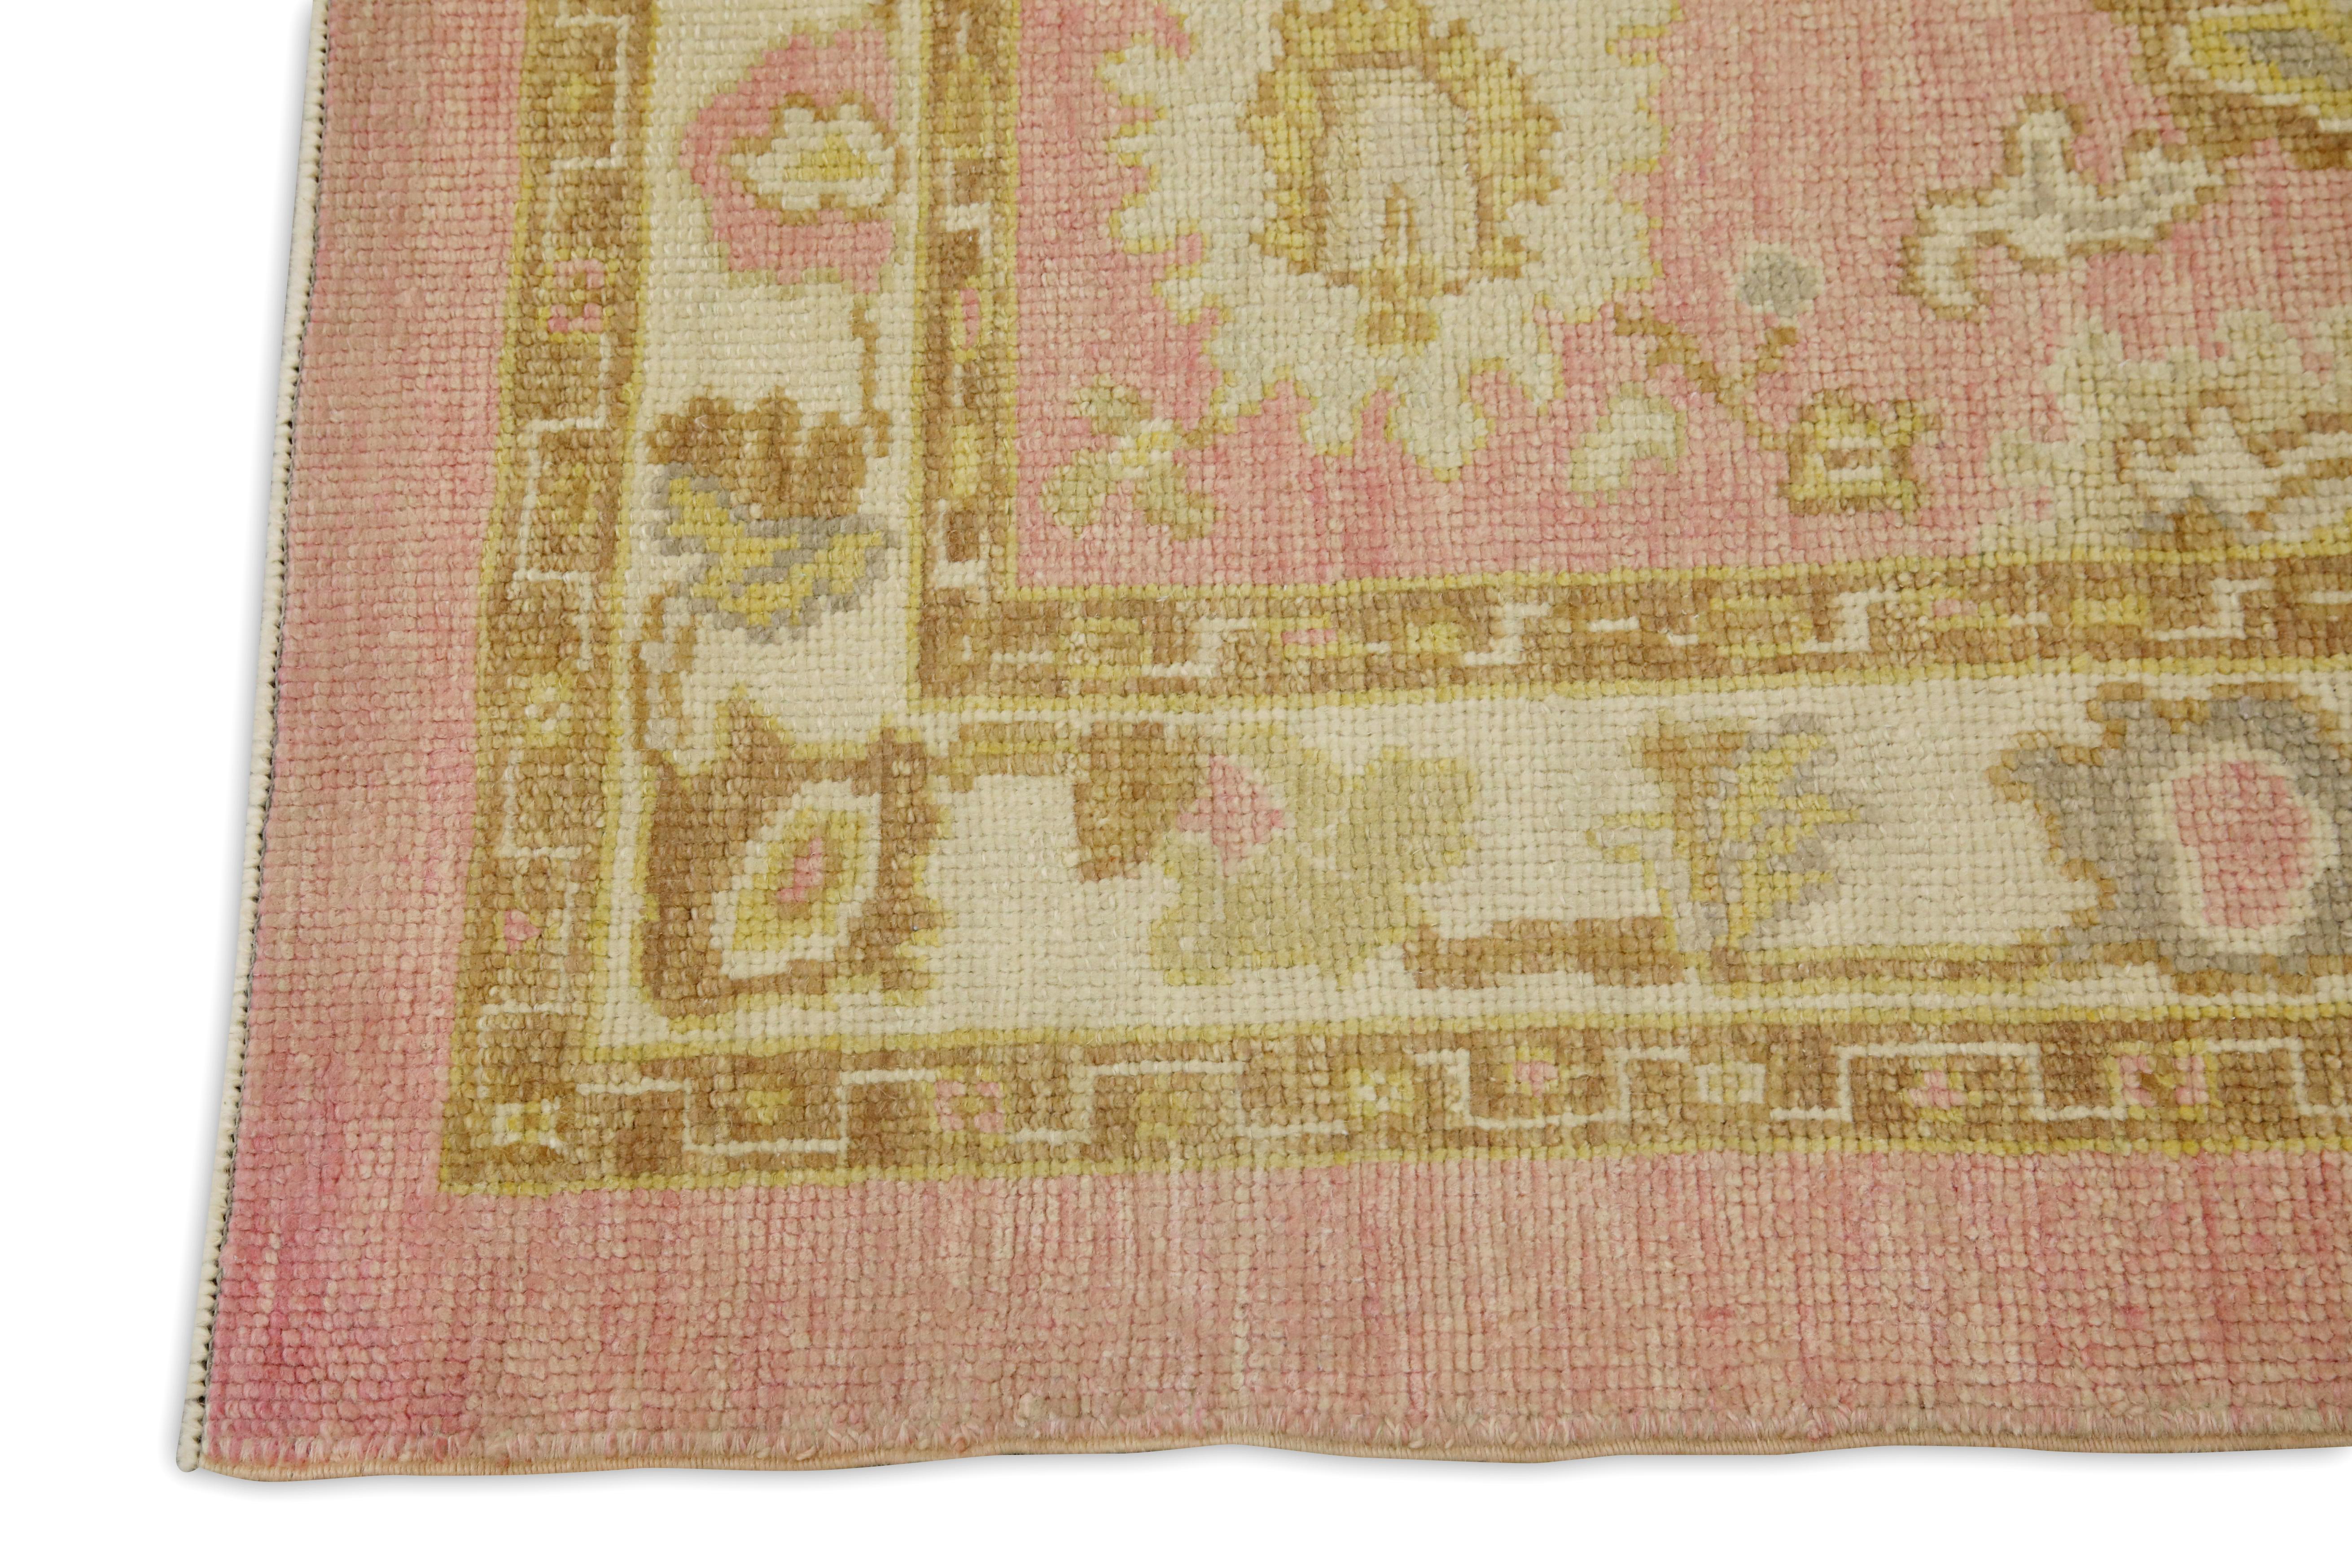 Hand-Woven Pink & Yellow Floral Design Handwoven Wool Turkish Oushak Rug 3' x 4'6